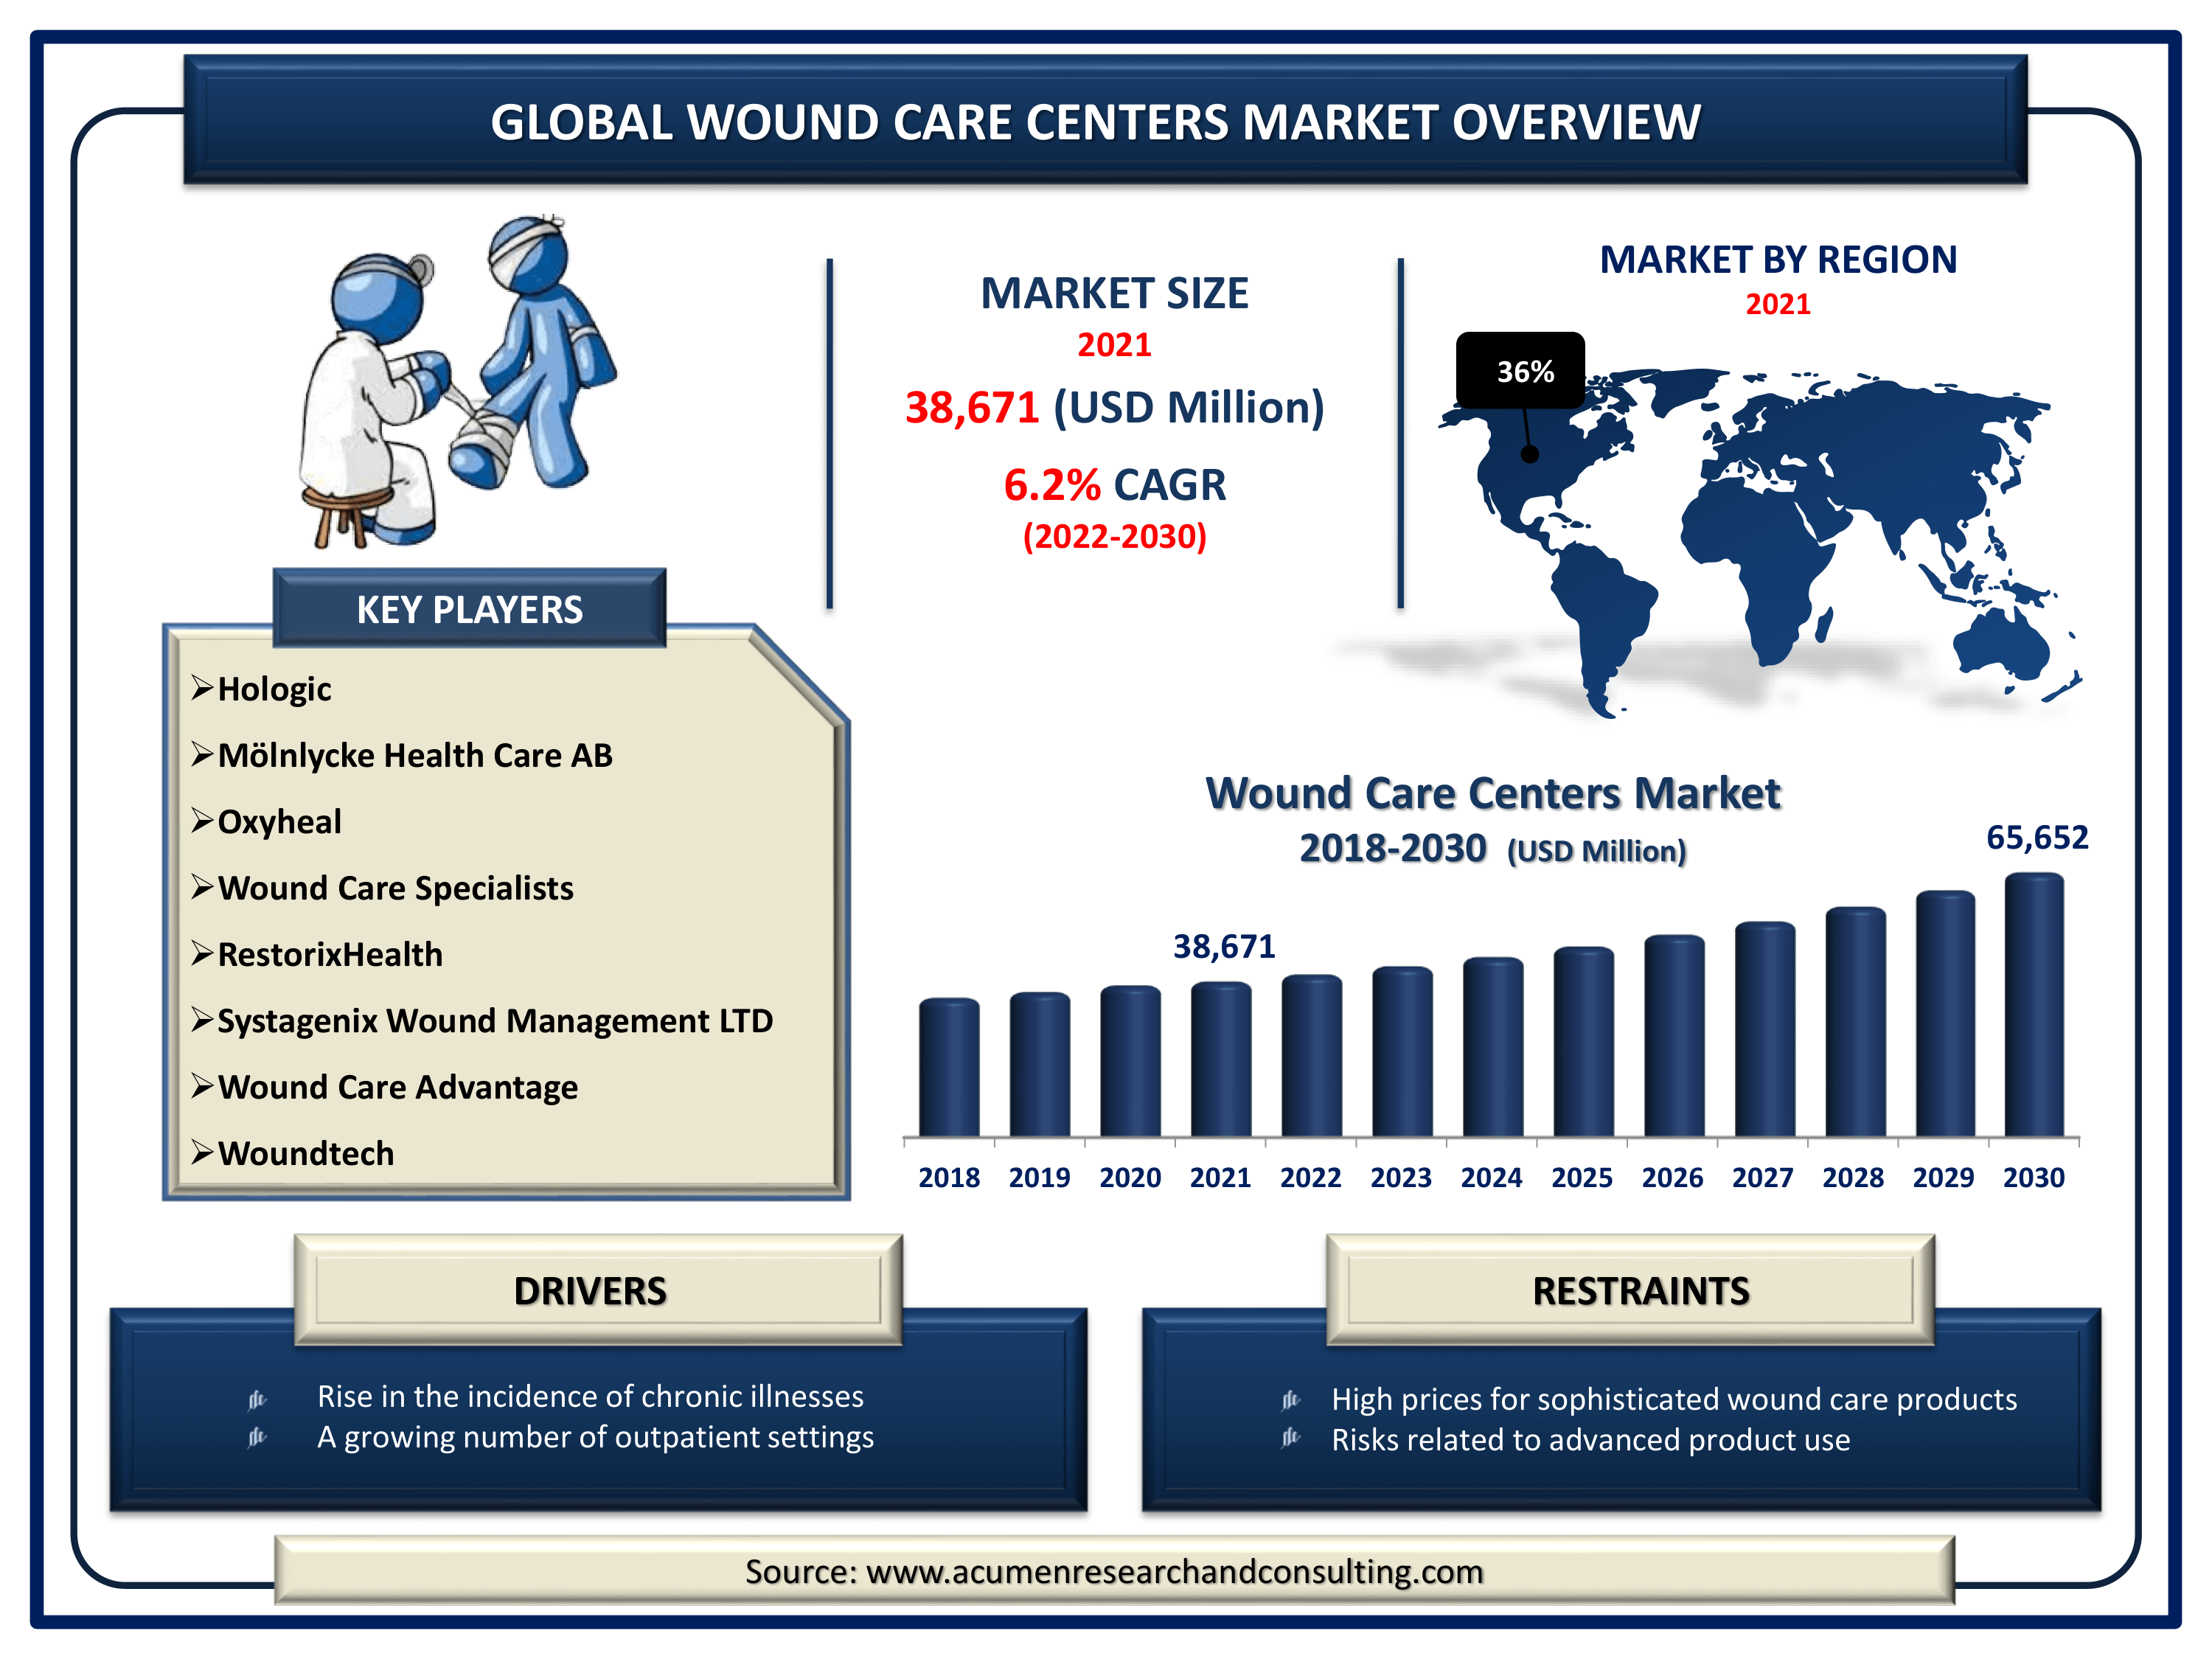 Global wound care centers market revenue is predicted to rise by USD 65,652 million by 2030, with a 6.2% CAGR from 2022 to 2030.